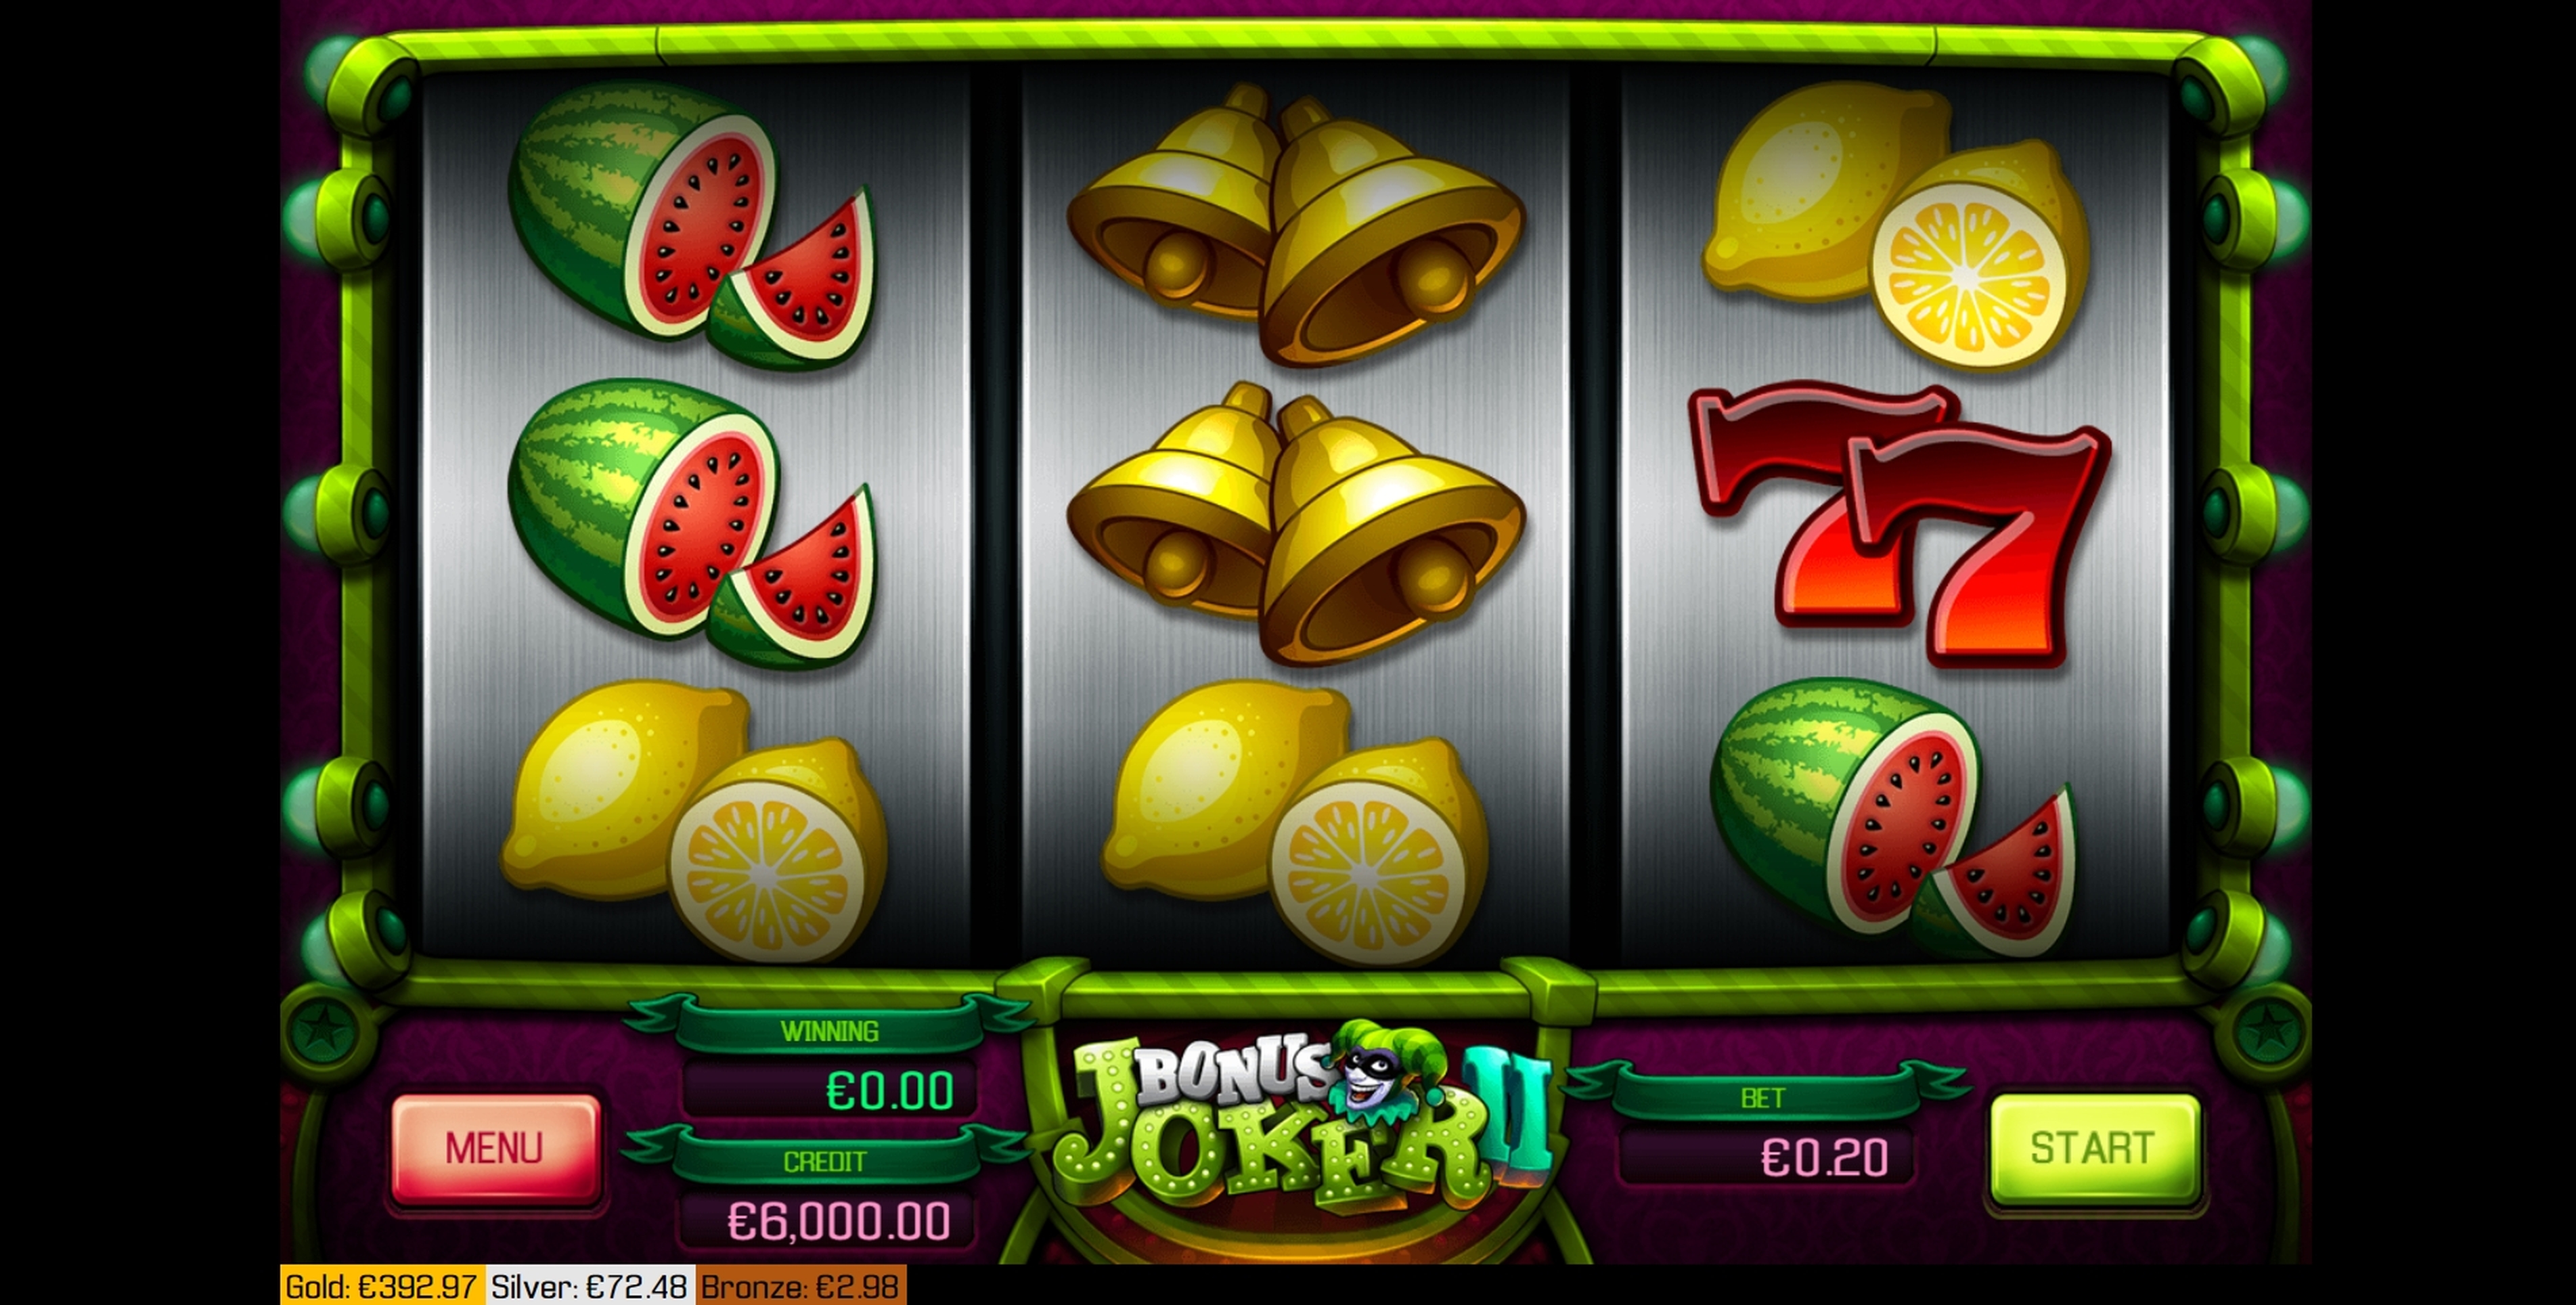 Are there any bonuses and rewards offered by online gambling sites?